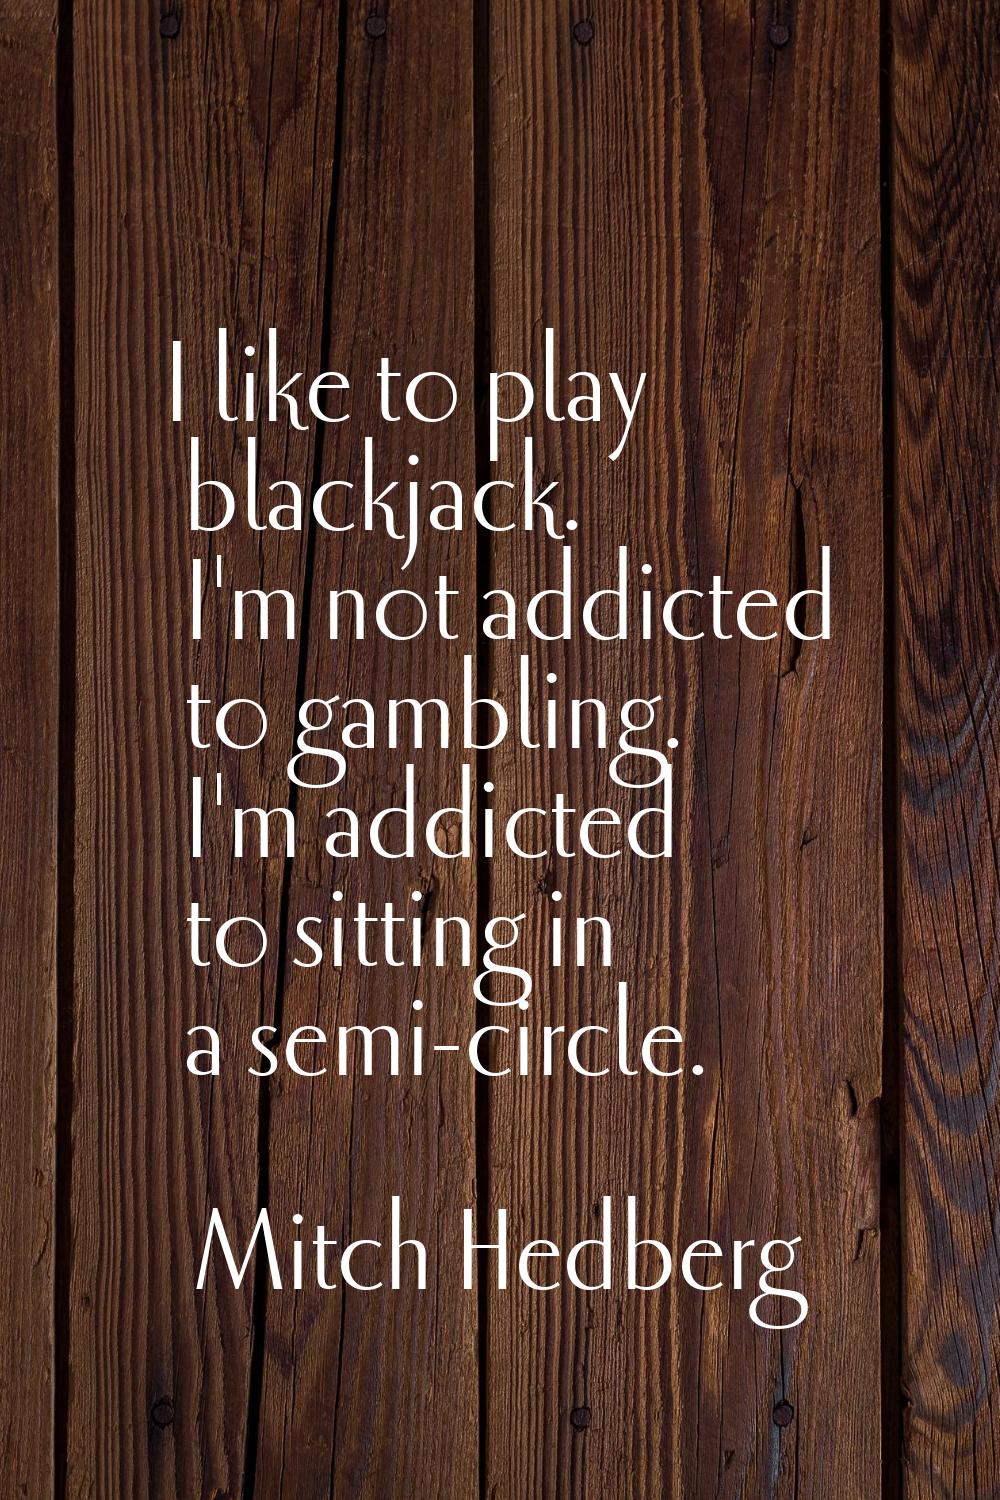 I like to play blackjack. I'm not addicted to gambling. I'm addicted to sitting in a semi-circle.